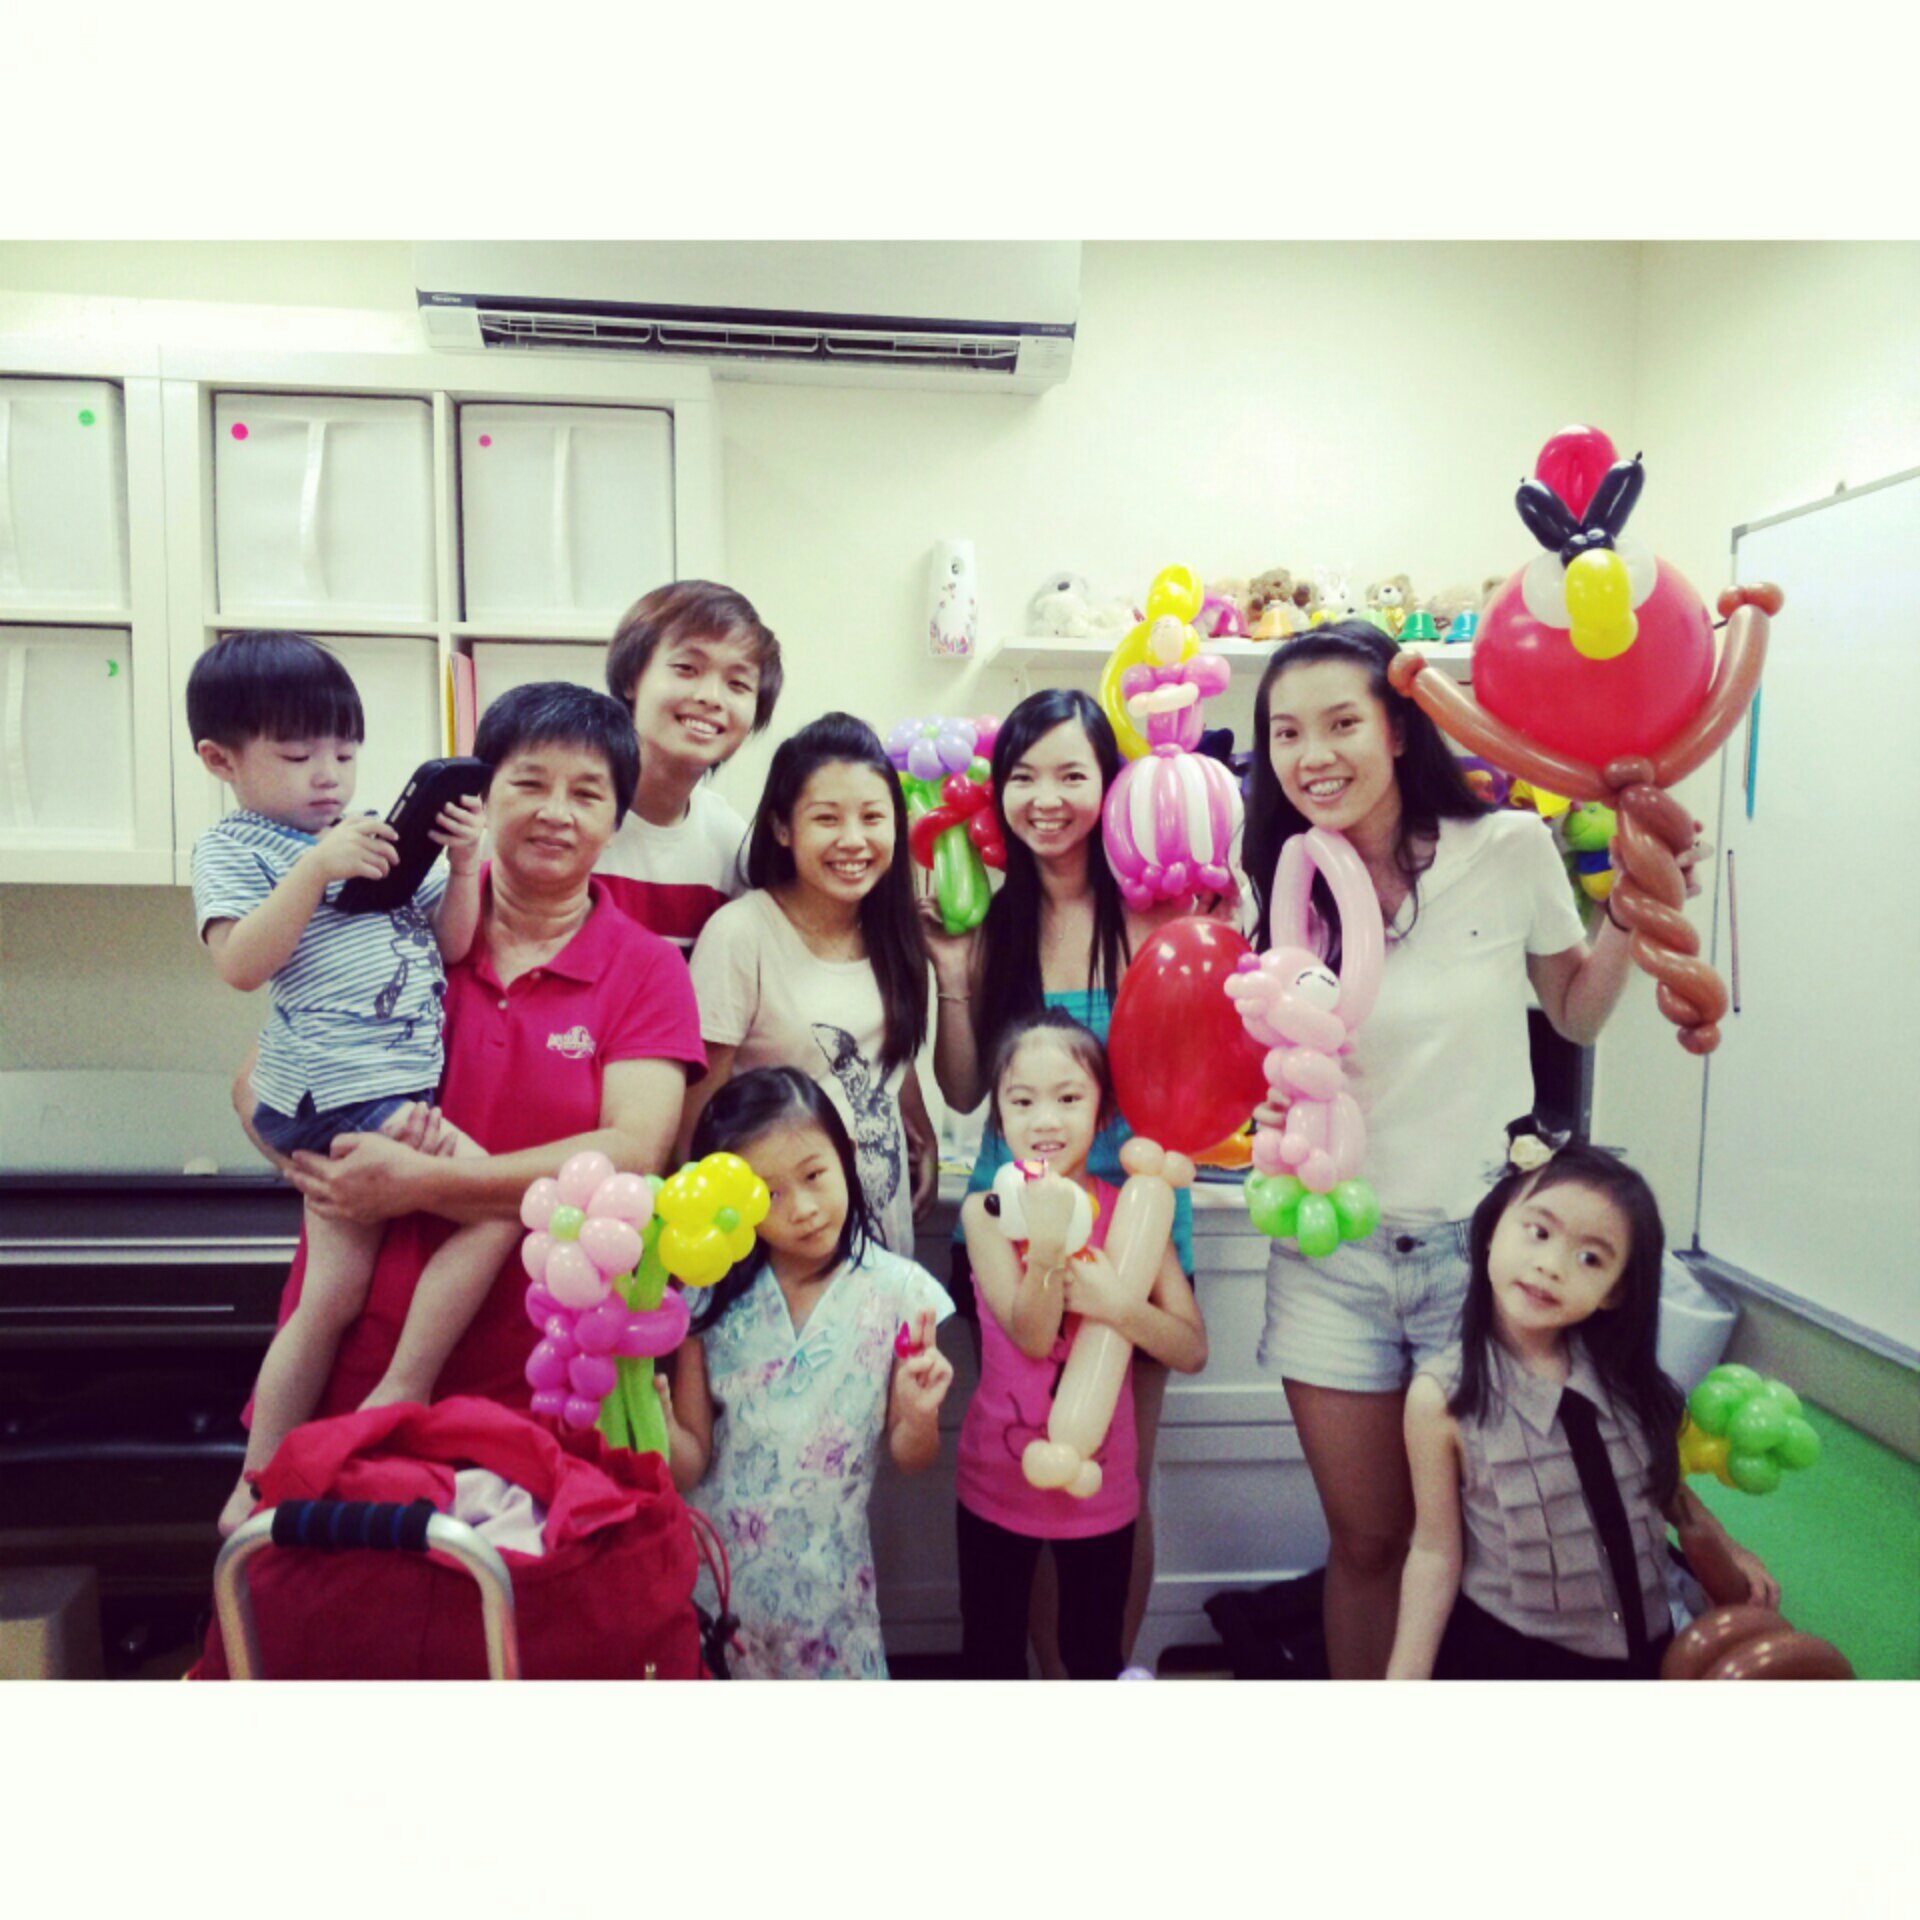 , Balloon sculpting at a local singapore childcare!, Singapore Balloon Decoration Services - Balloon Workshop and Balloon Sculpting